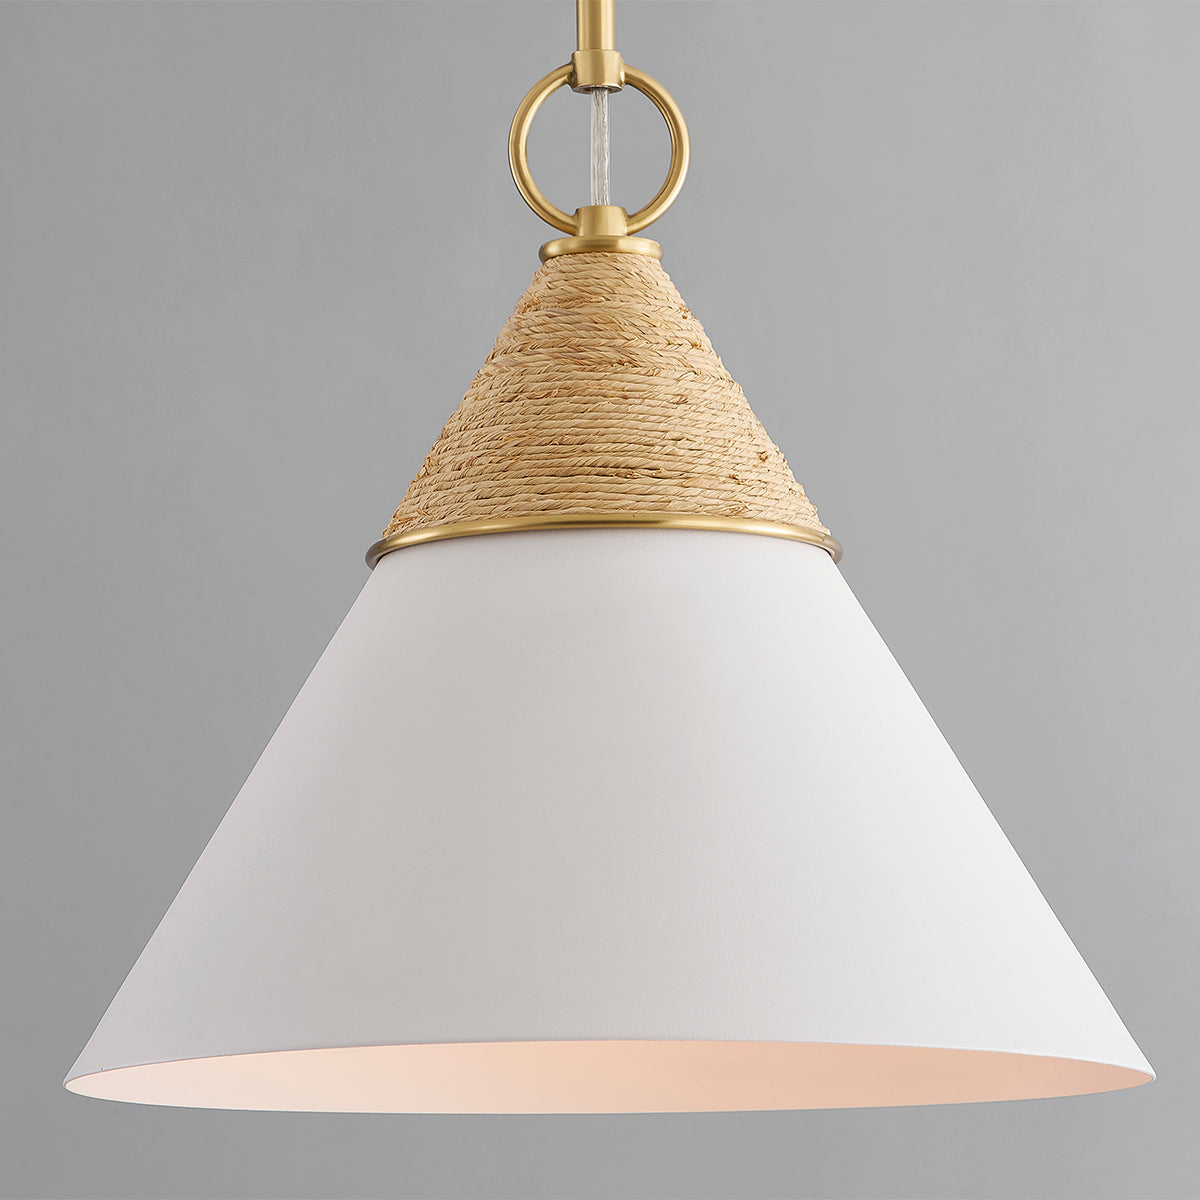 Aged Brass Frame with Raffia Wrapped Textured White Shade Pendant